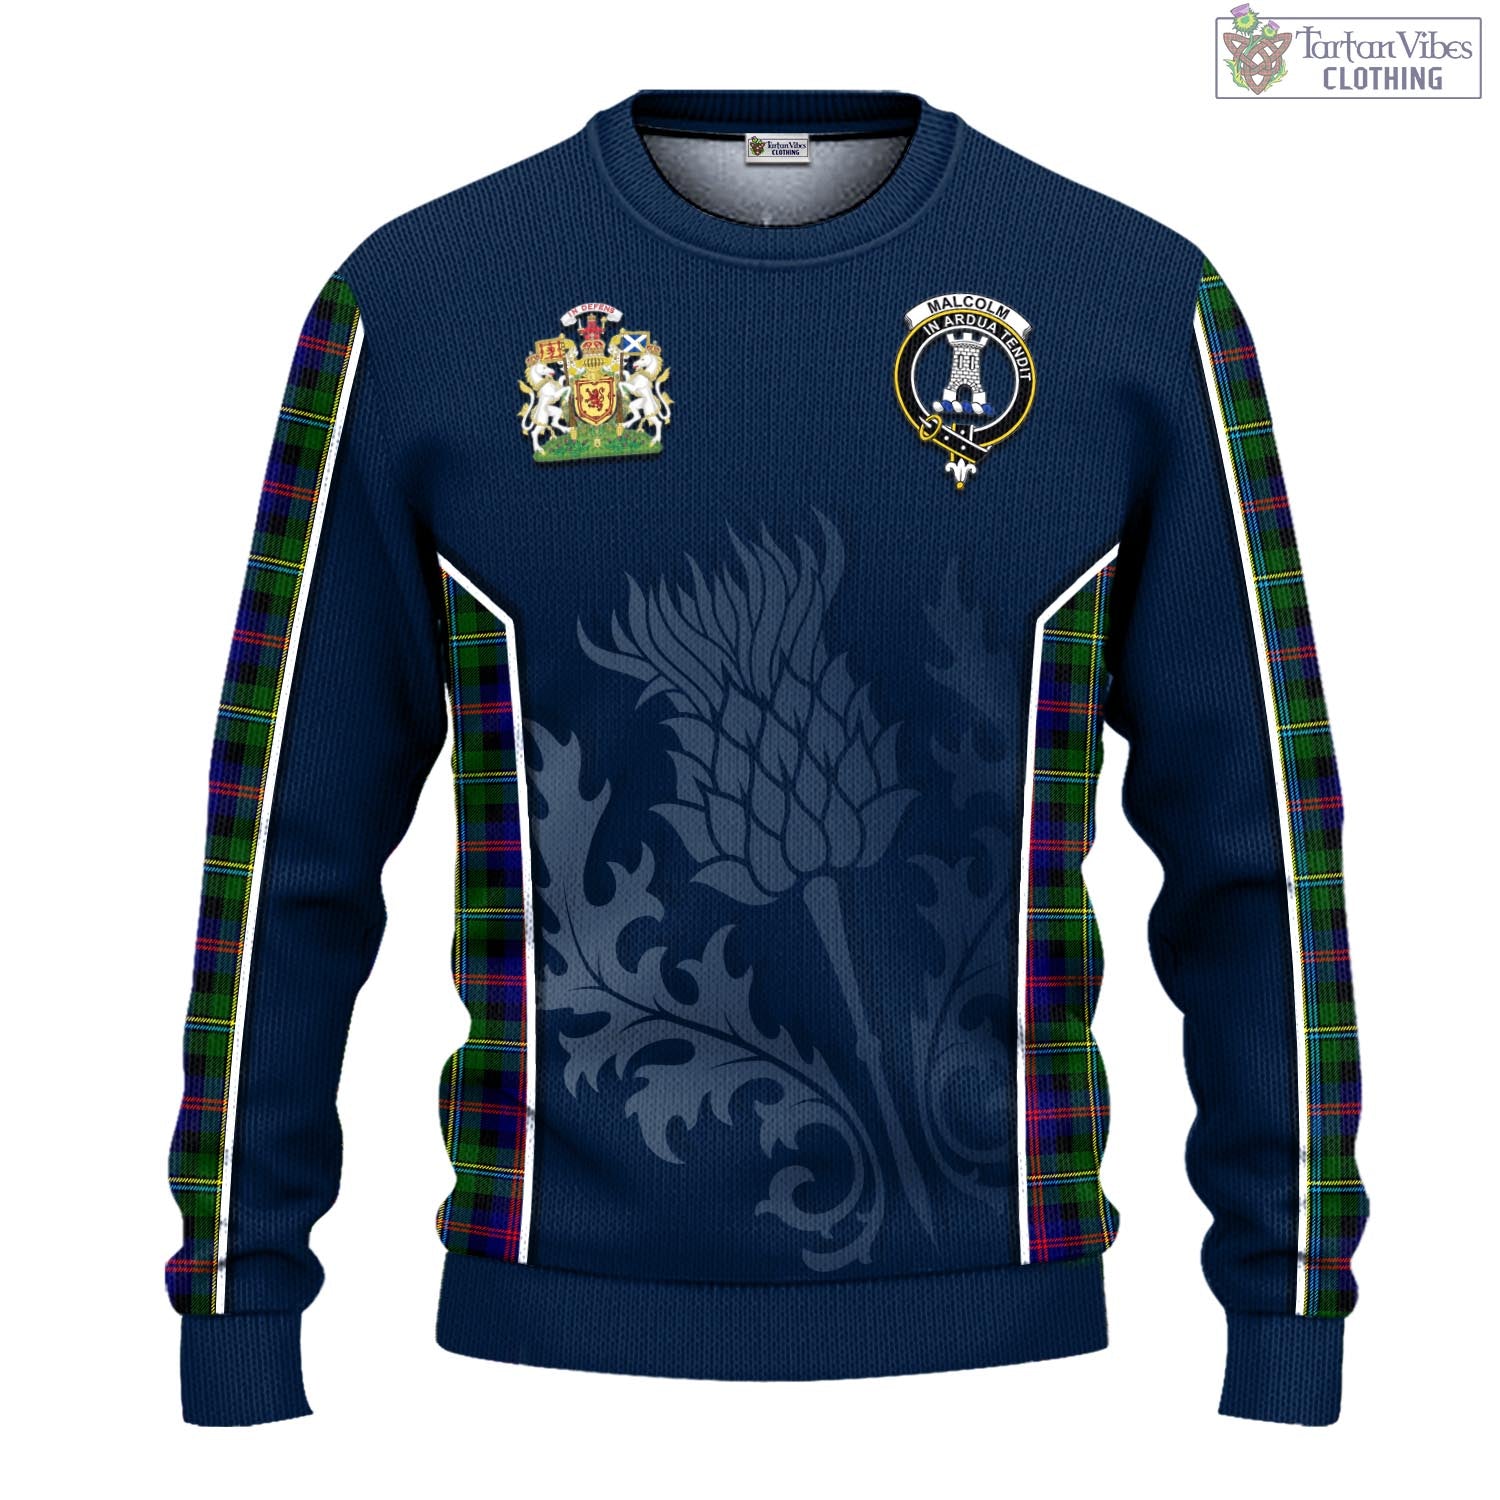 Tartan Vibes Clothing Malcolm Tartan Knitted Sweatshirt with Family Crest and Scottish Thistle Vibes Sport Style